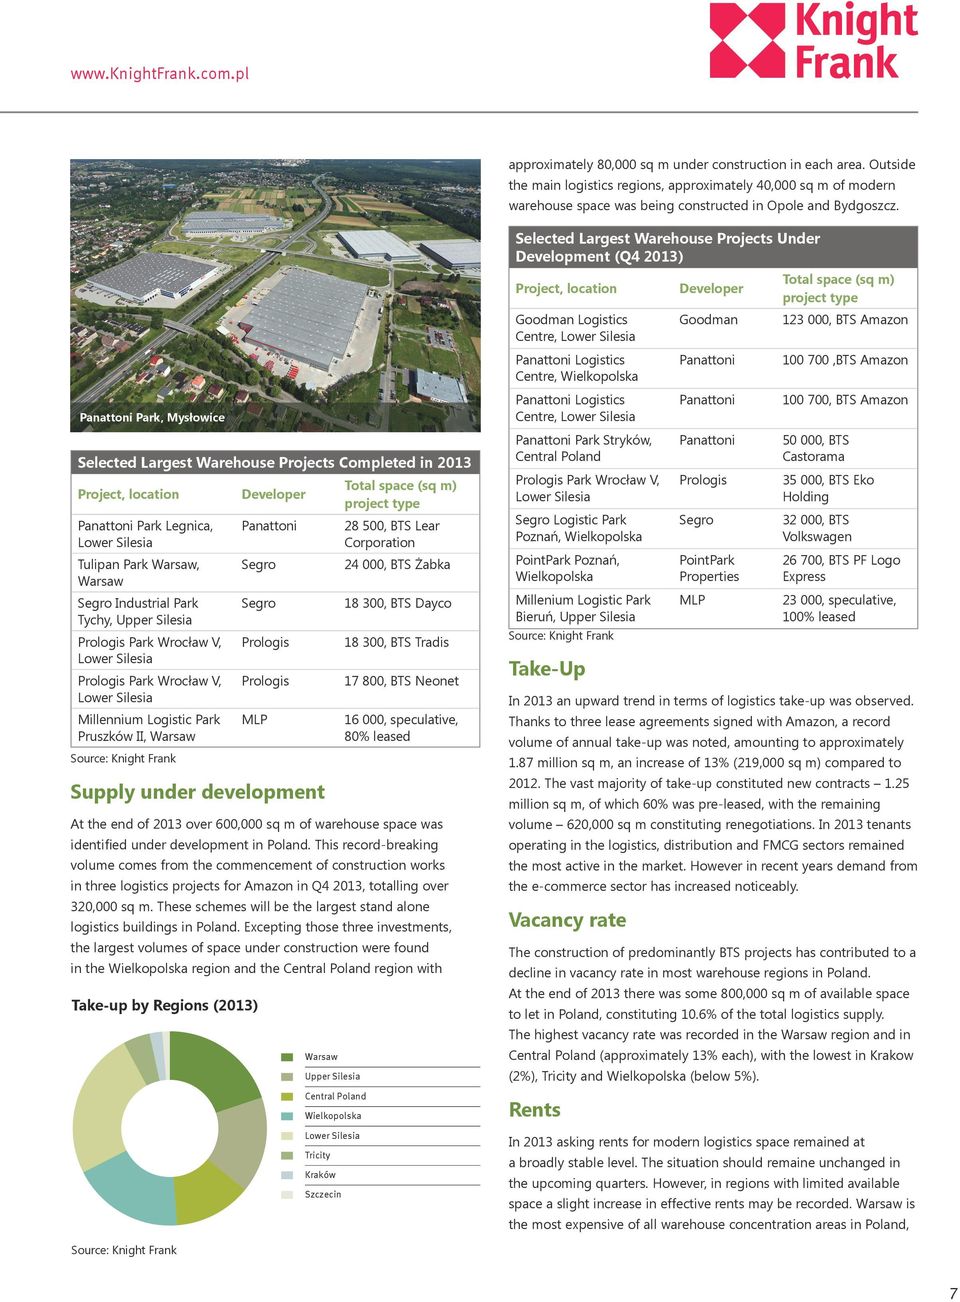 Panattoni Park, Mysłowice Selected Largest Warehouse Projects Completed in 213 Project, location Panattoni Park Legnica, Lower Silesia Tulipan Park Warsaw, Warsaw Segro Industrial Park Tychy, Upper